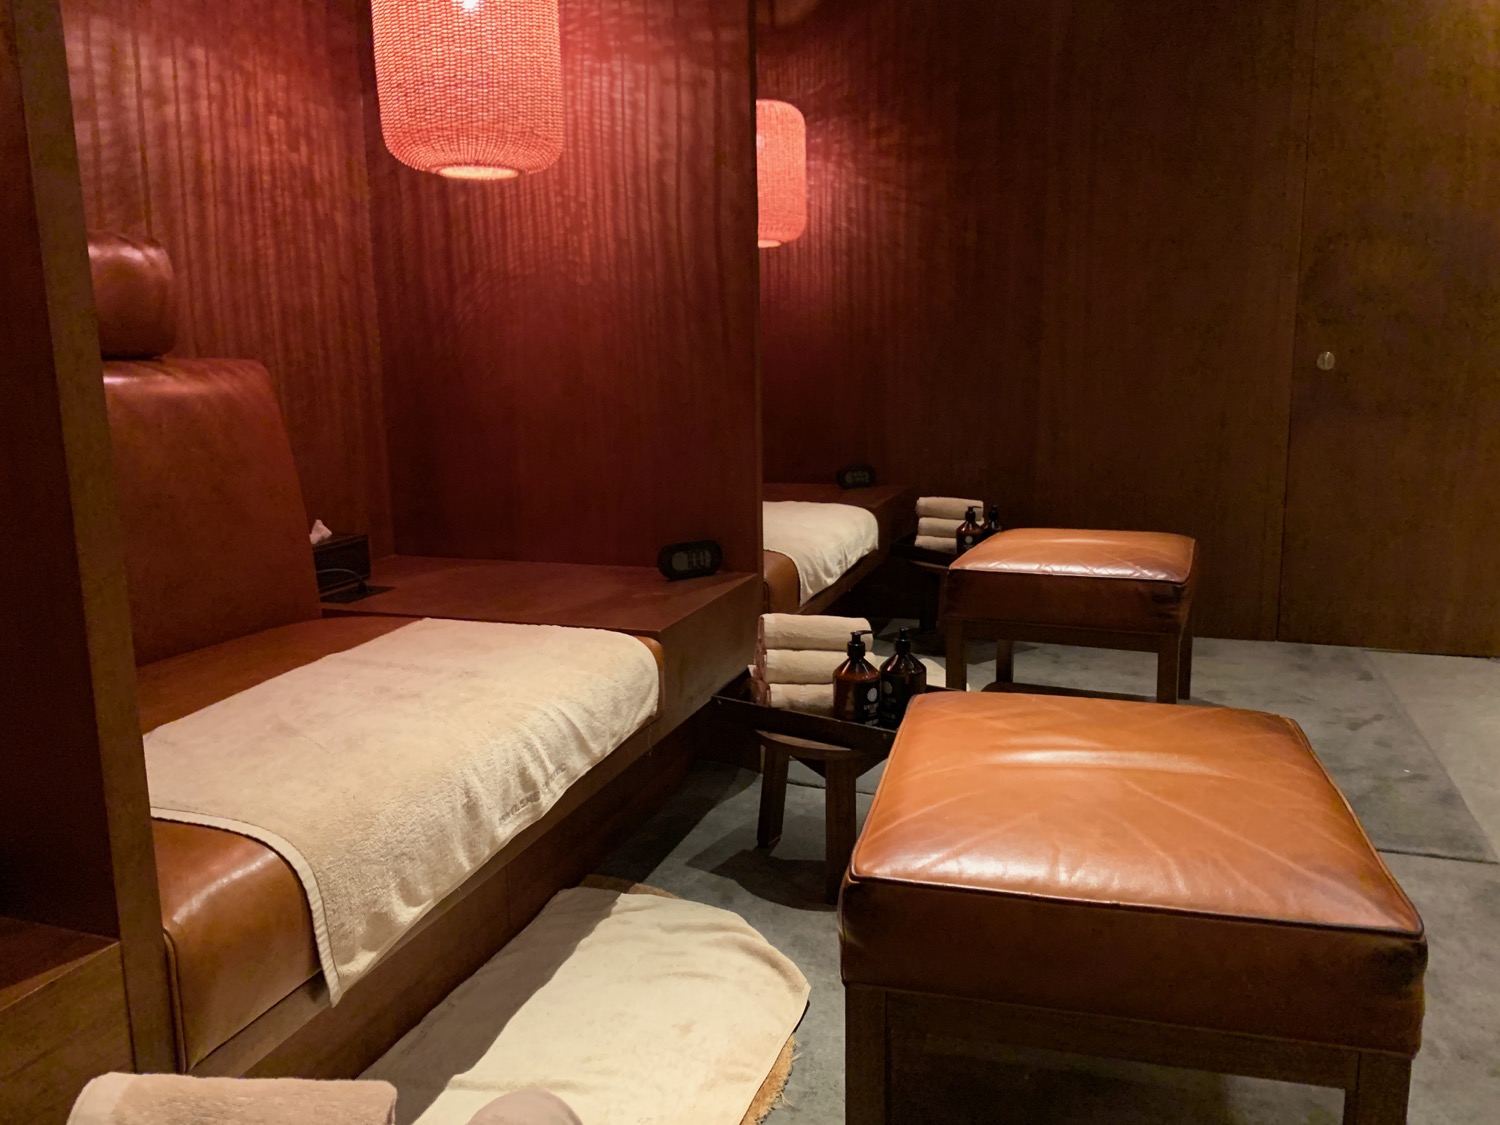 a room with brown leather furniture and a red light